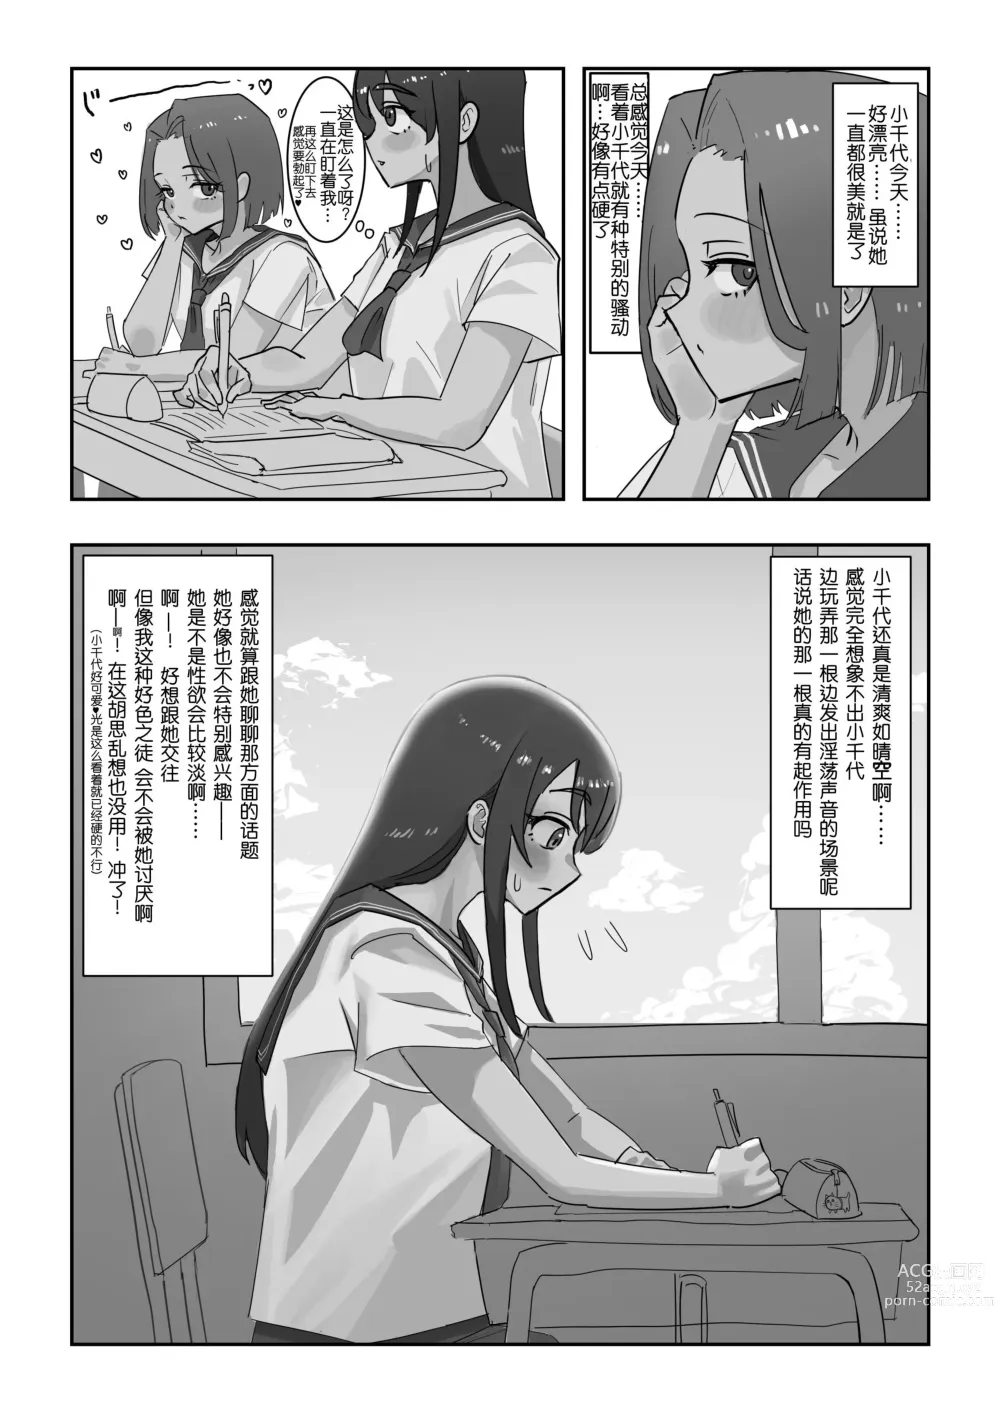 Page 3 of doujinshi Onahole After School